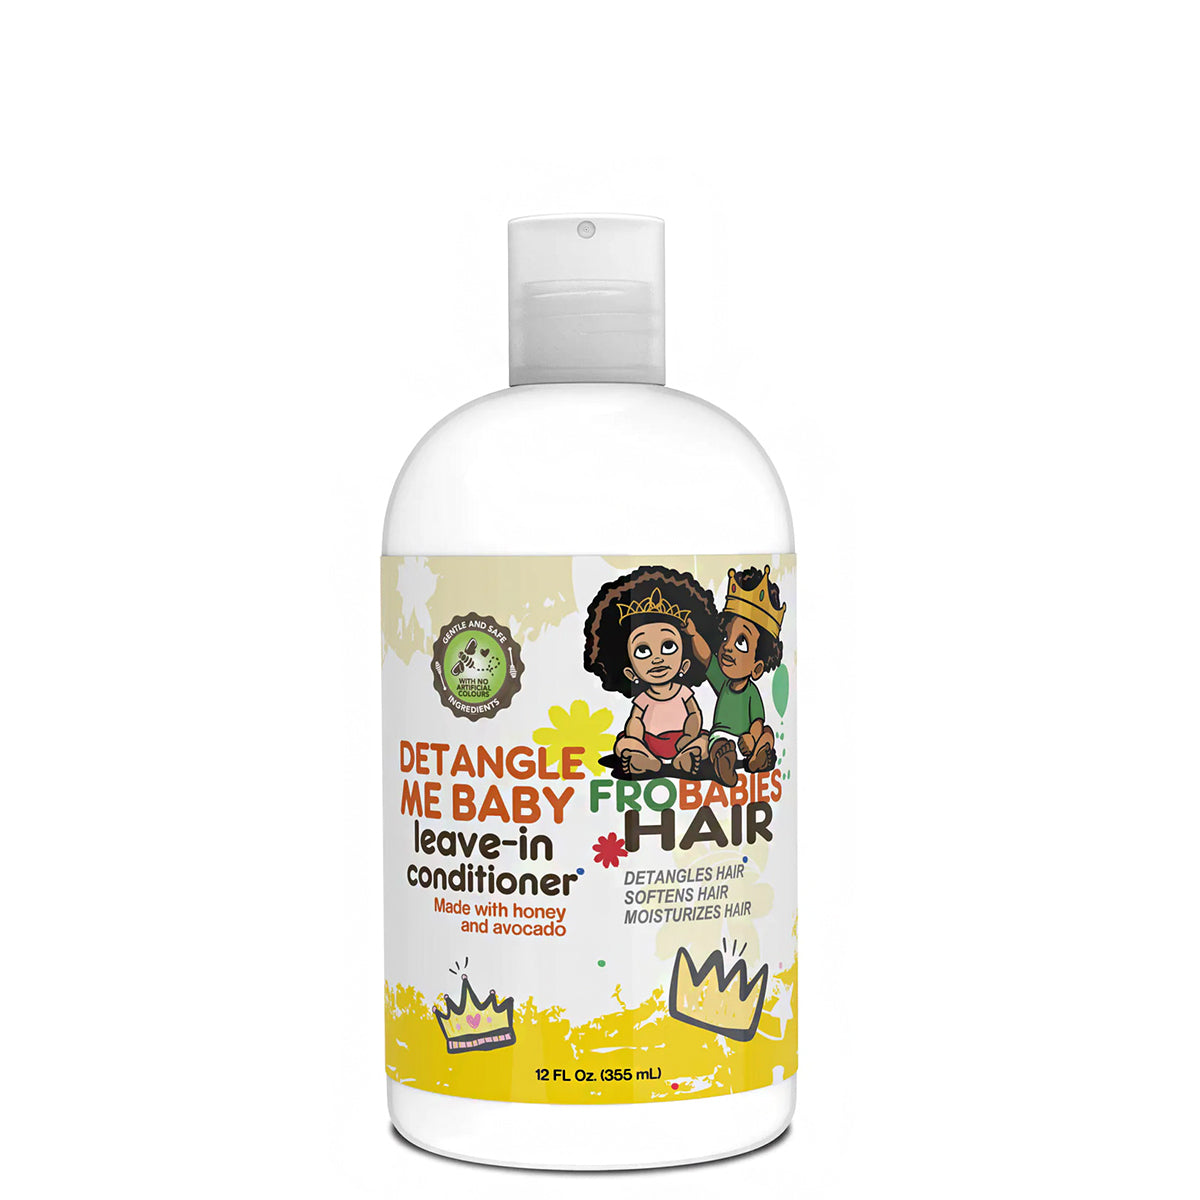 Fro Babies Hair Detangle Me Baby Leave-In Conditioner 12oz